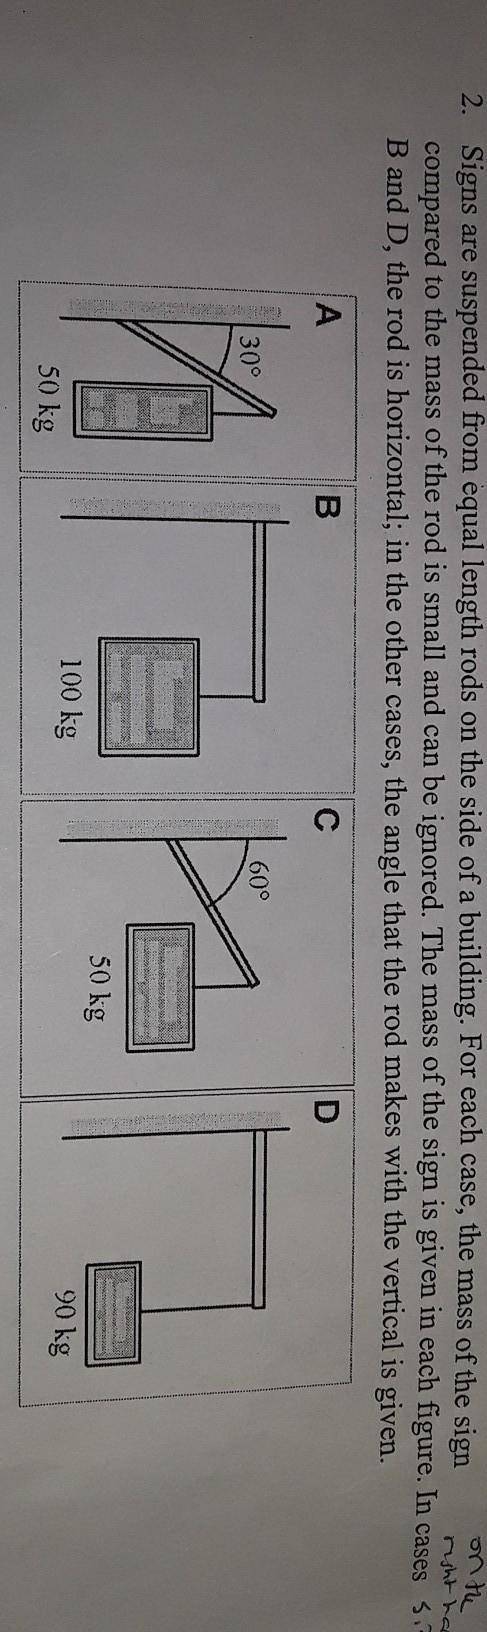 Can sonebody help answer and explain this problem:the problem is in the picture.